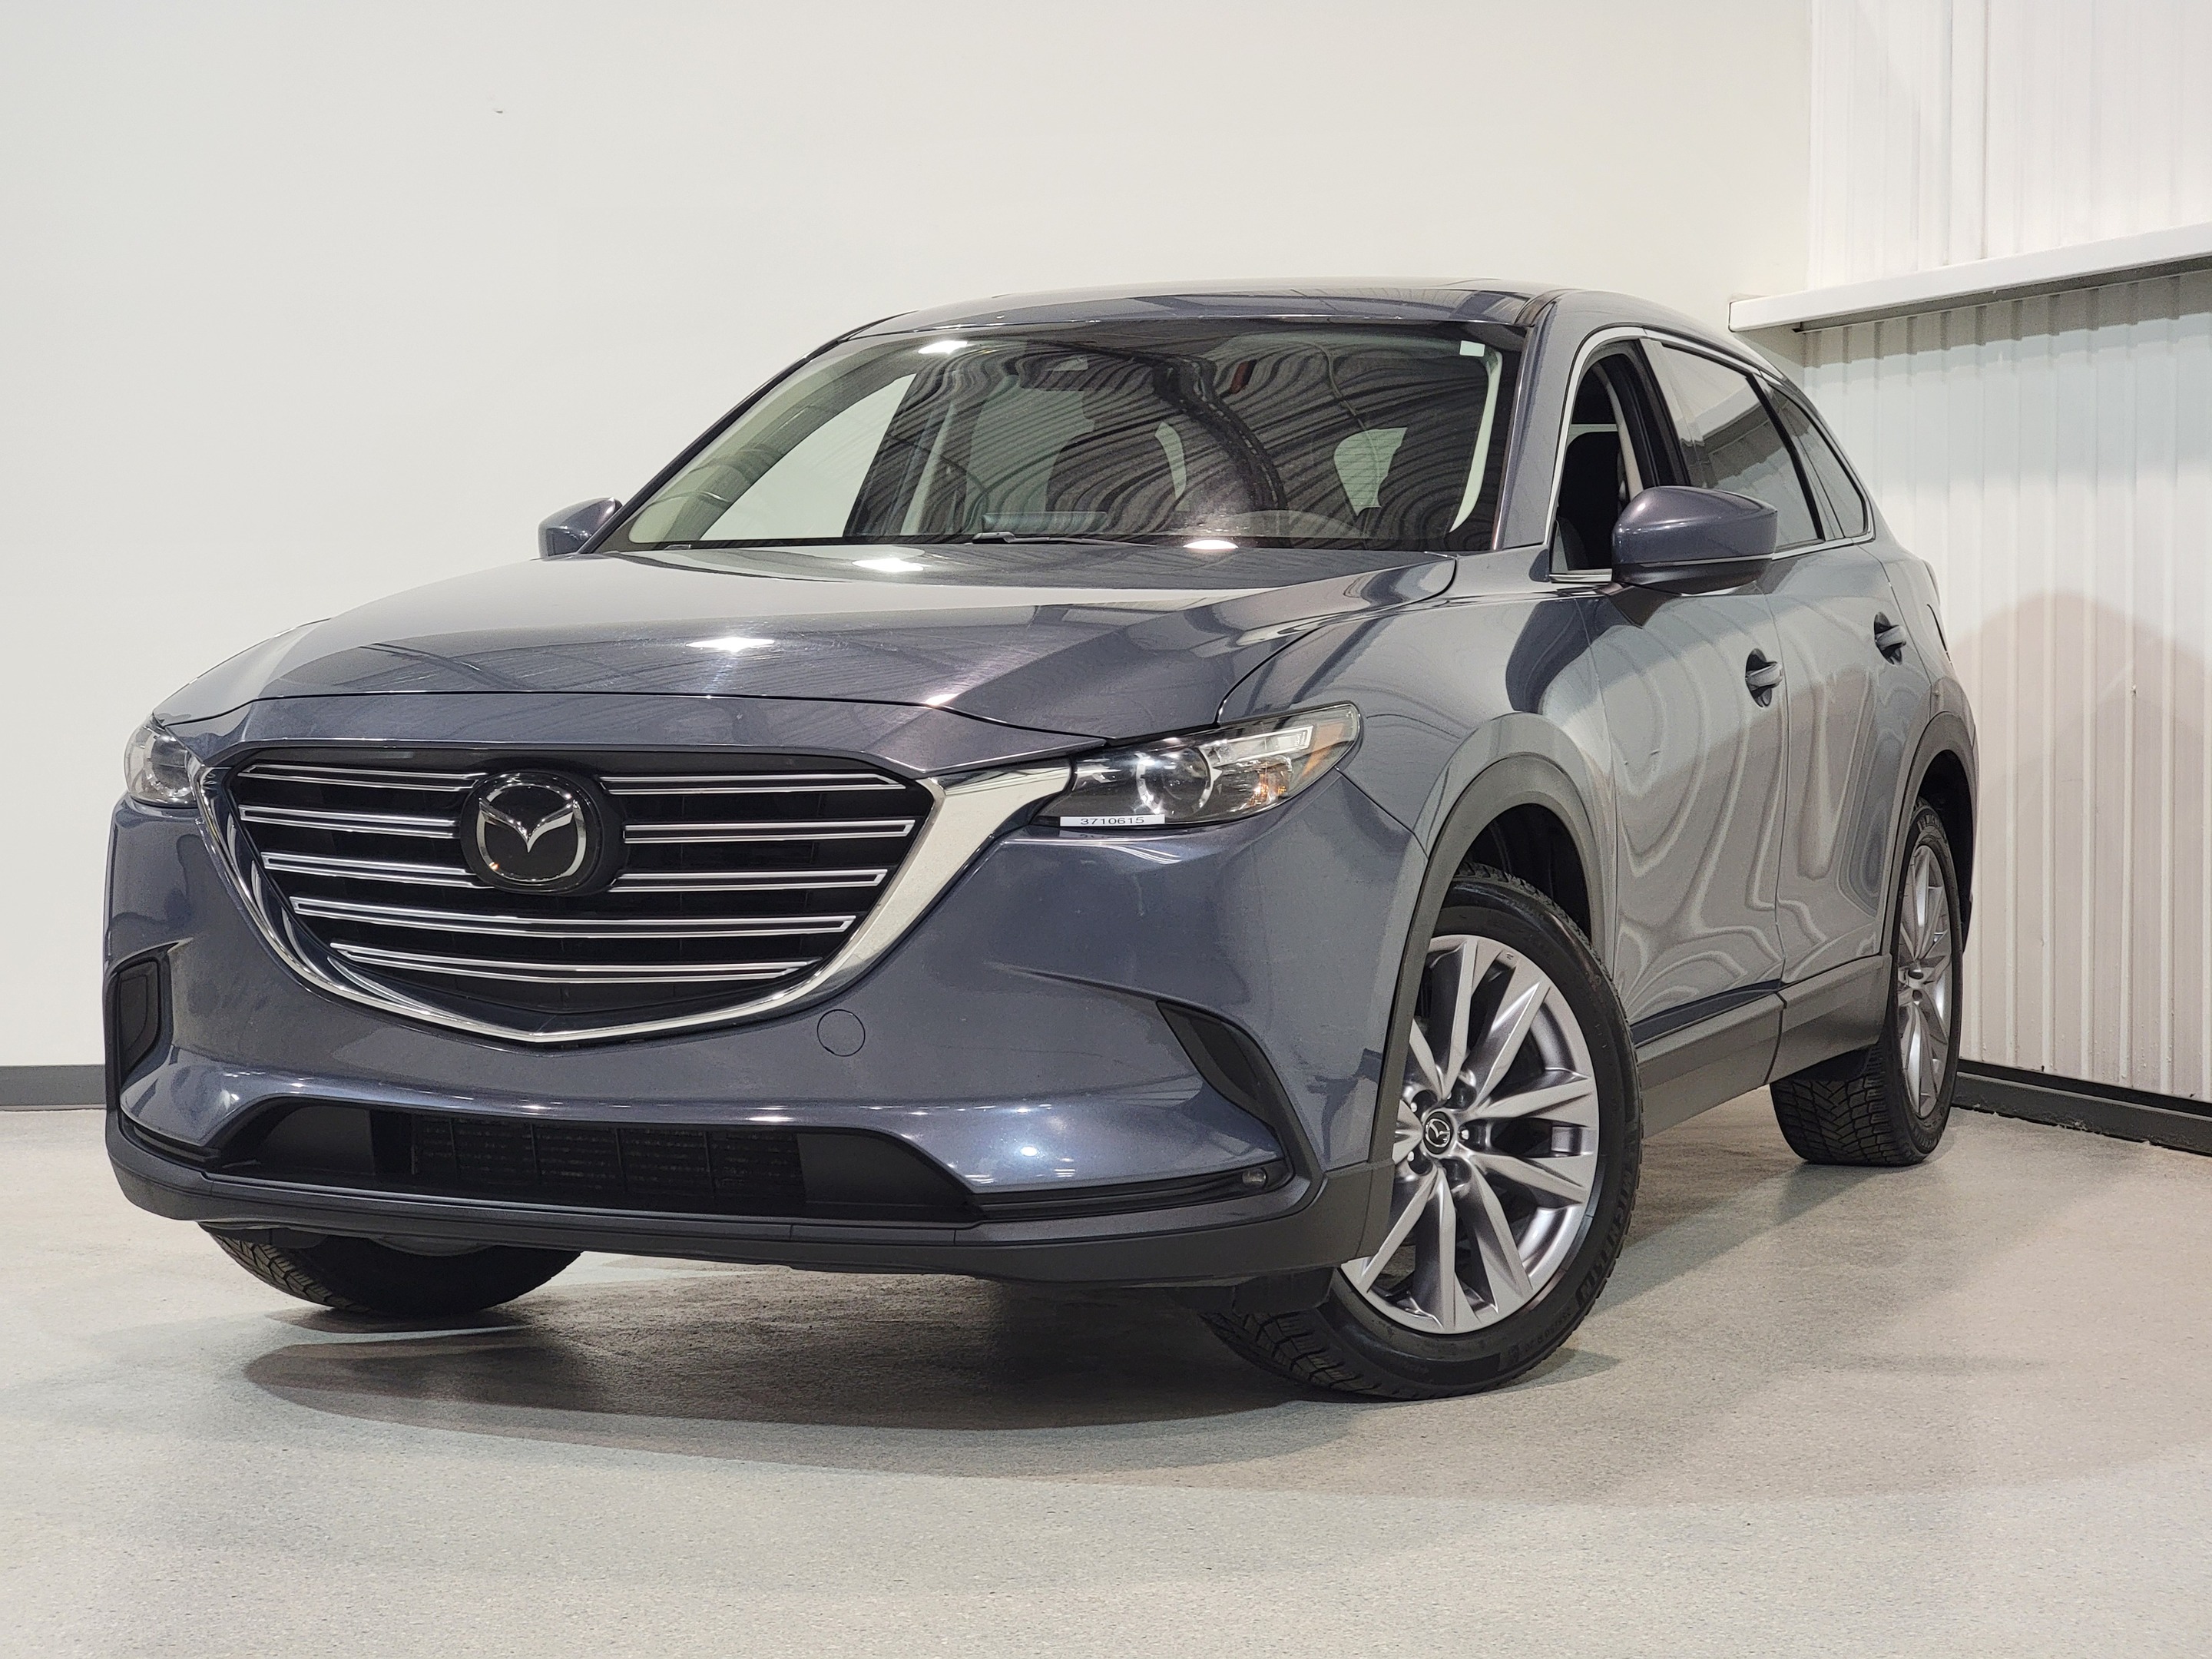 2021 Mazda CX-9 GS-L AWD 7 Passagers, Toit ouvrant, Cuir